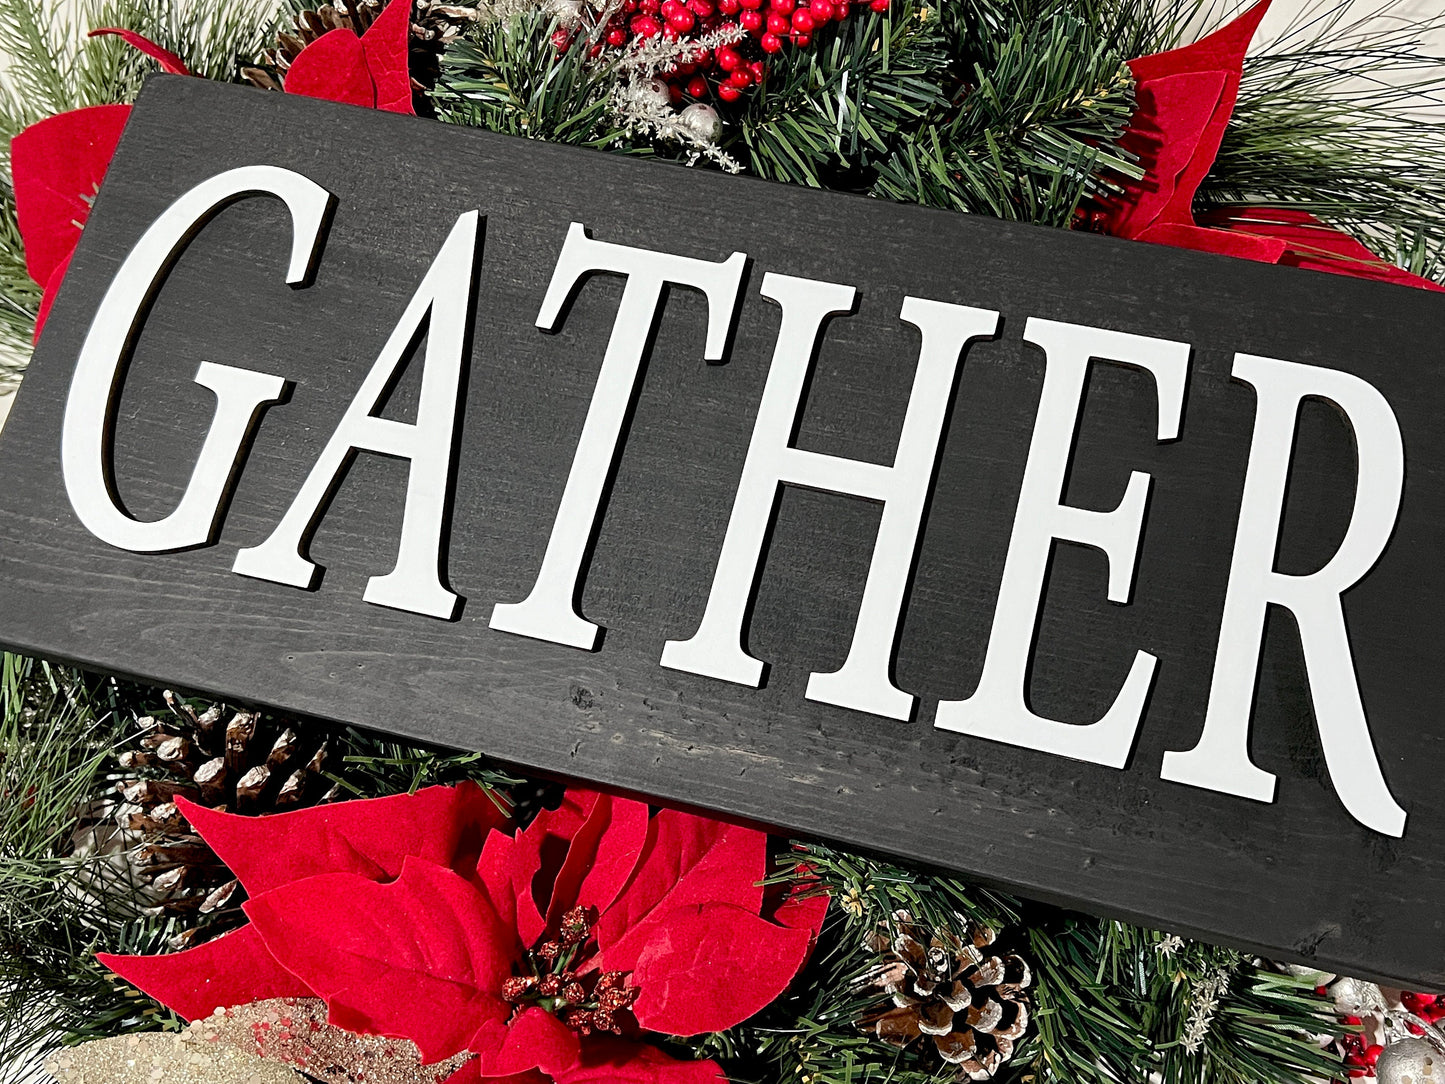 Gather sign, home decorations, 3D wall art, mantel decor, entryway wood signs, living room wooden sign, wall hanging, fireplace mantel decor